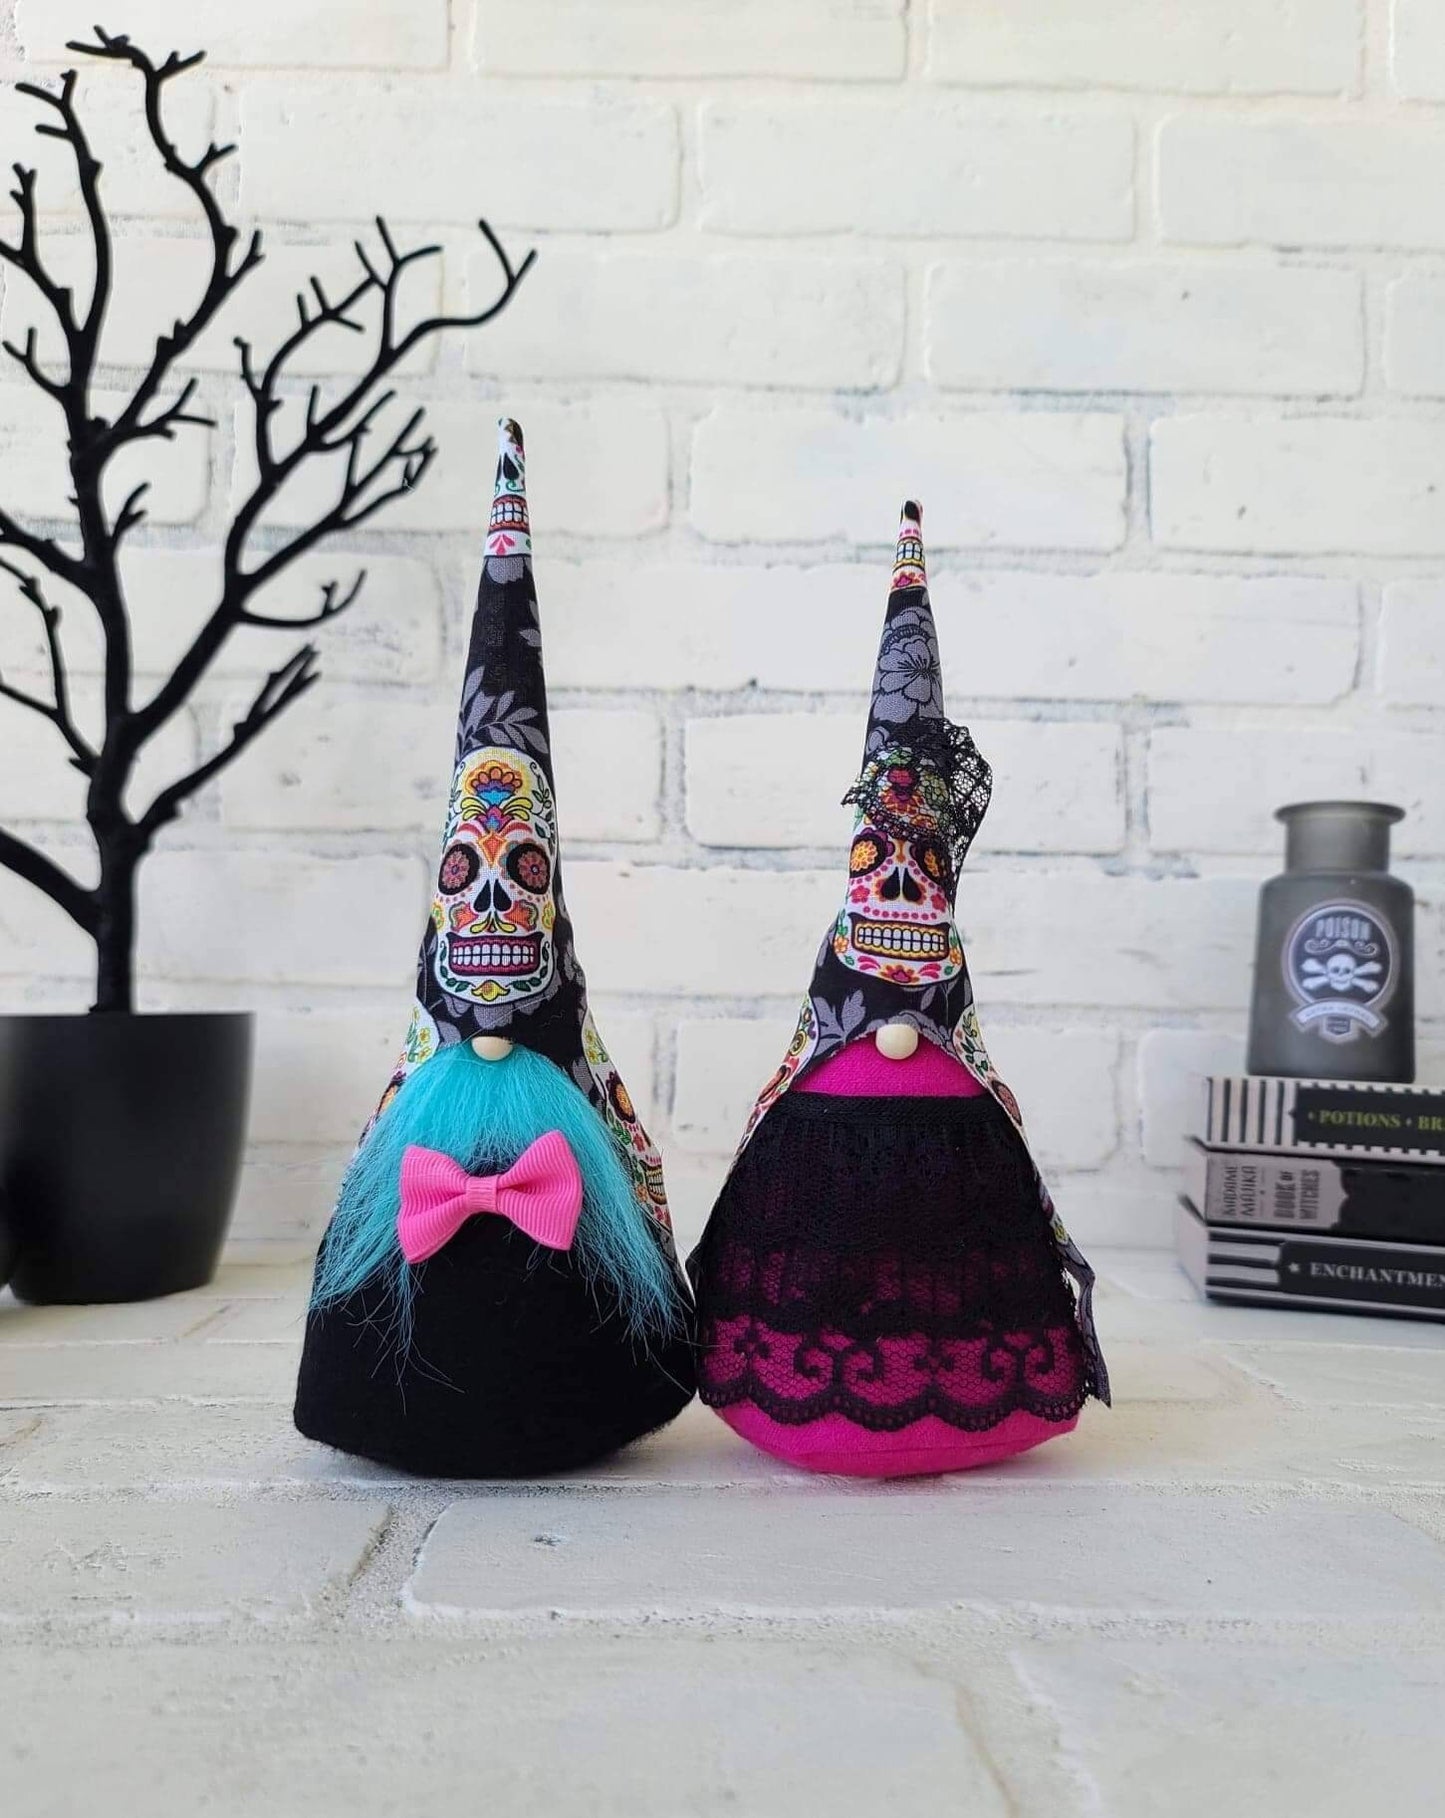 Sugar Skull Gnome set, Groom accented with teal beard and hot pink bow. While Bride adorns a hot pink body with black lace dress and veil.